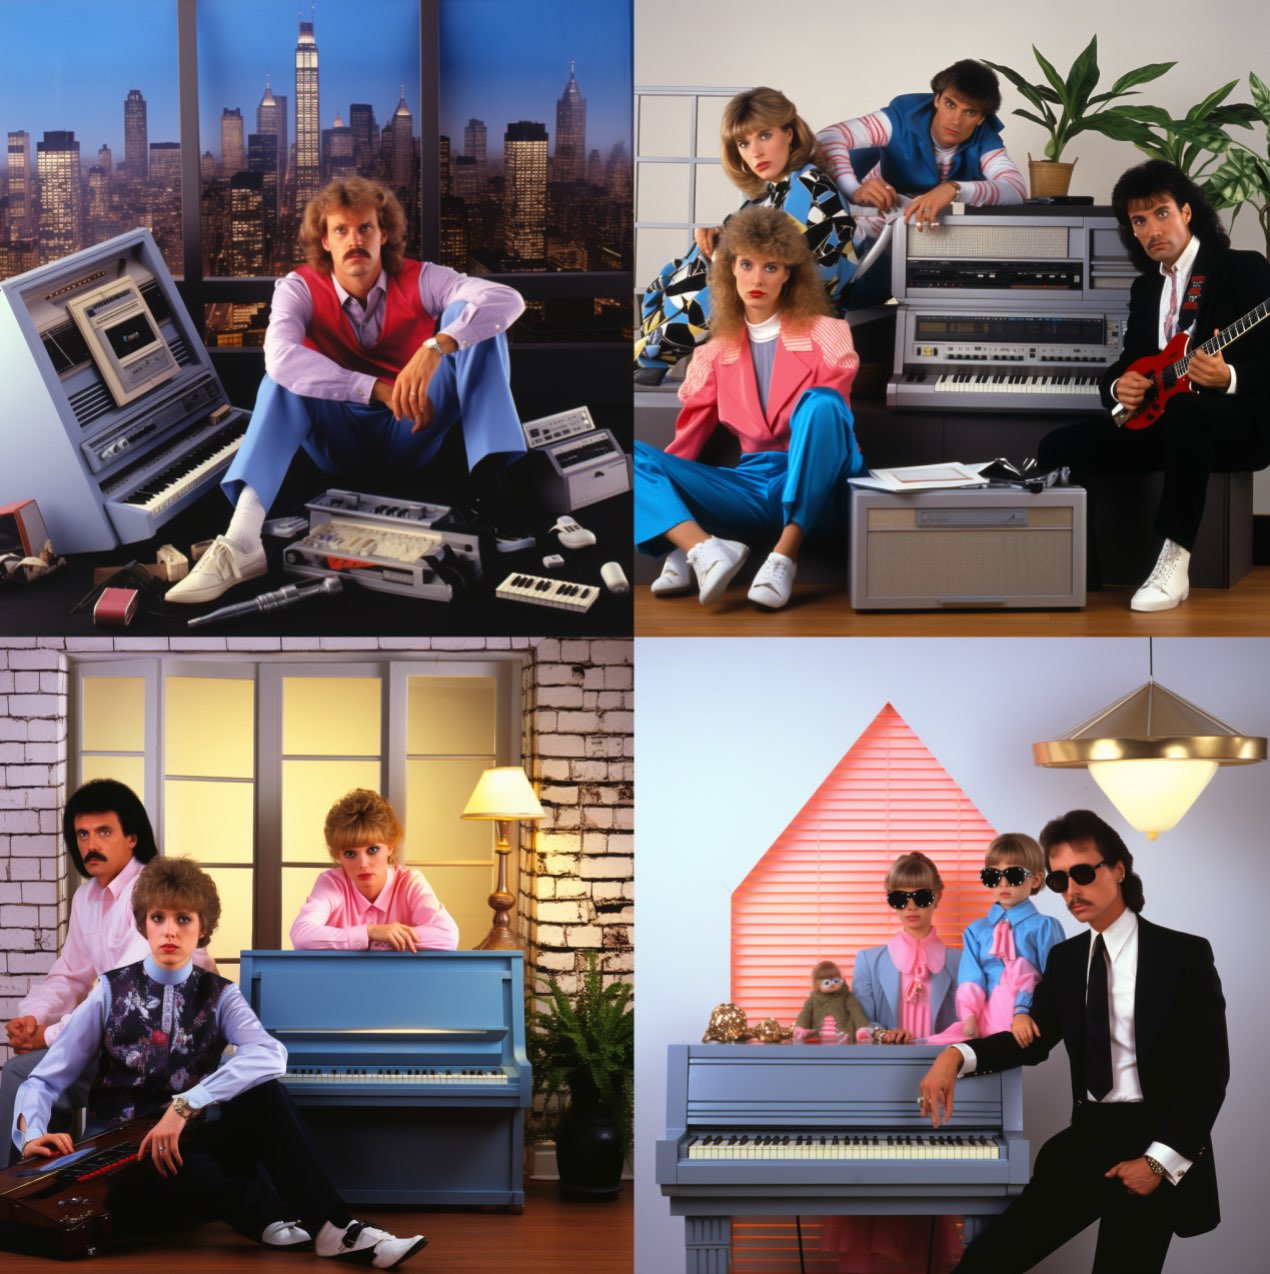 pop music, photography, album cover, everyday situation 1980s